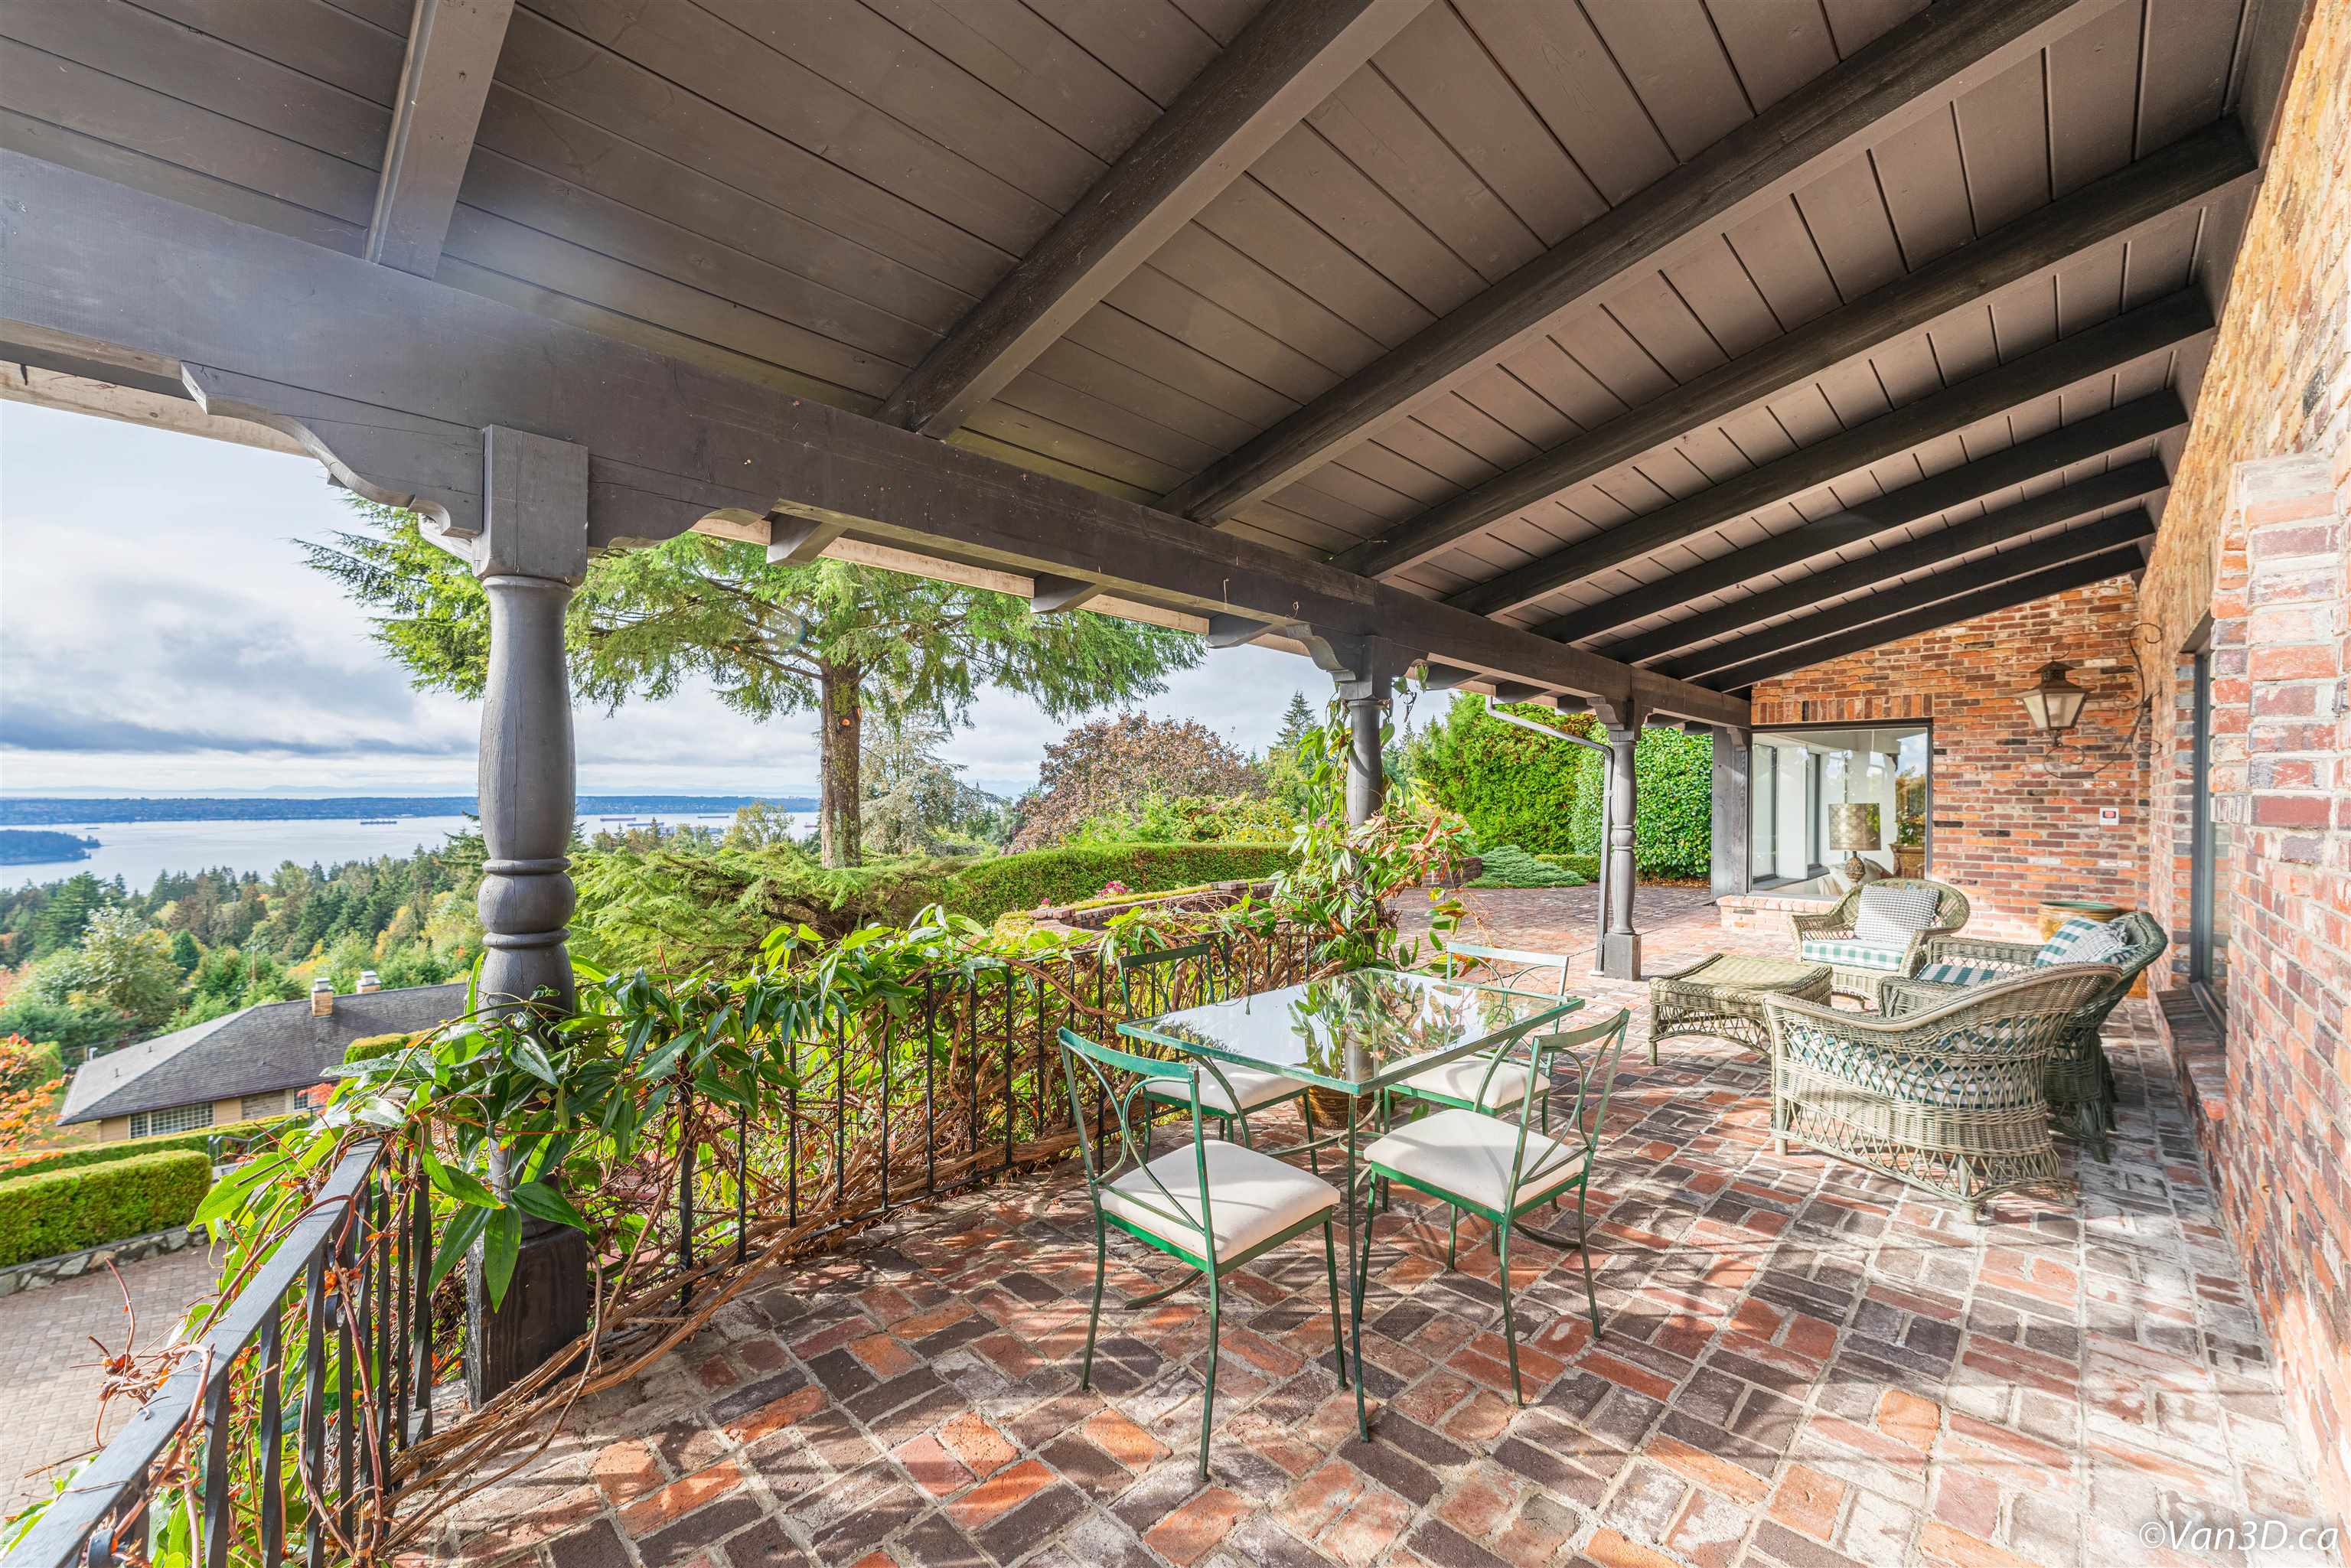 Listing image of 985 KING GEORGES WAY